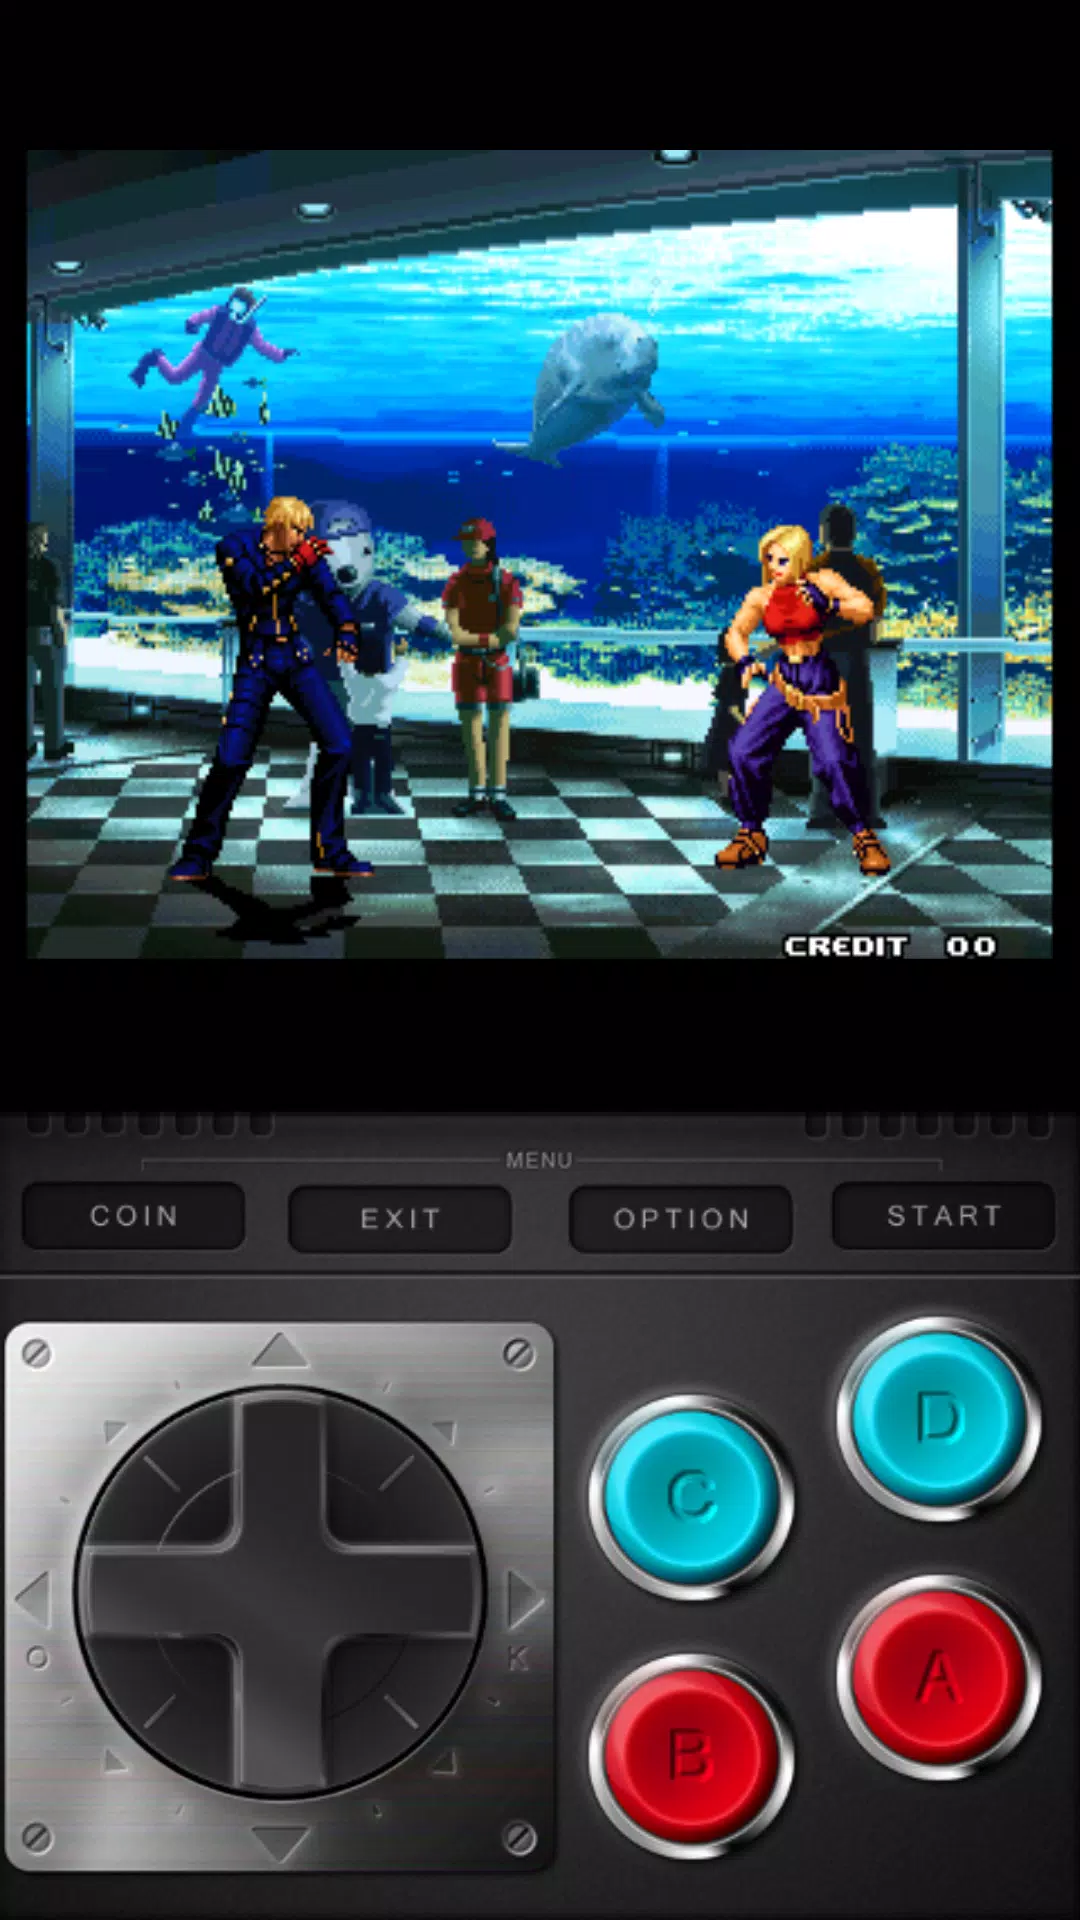 Download Kof 2002 Magic Plus APK 1.1.2 for Android